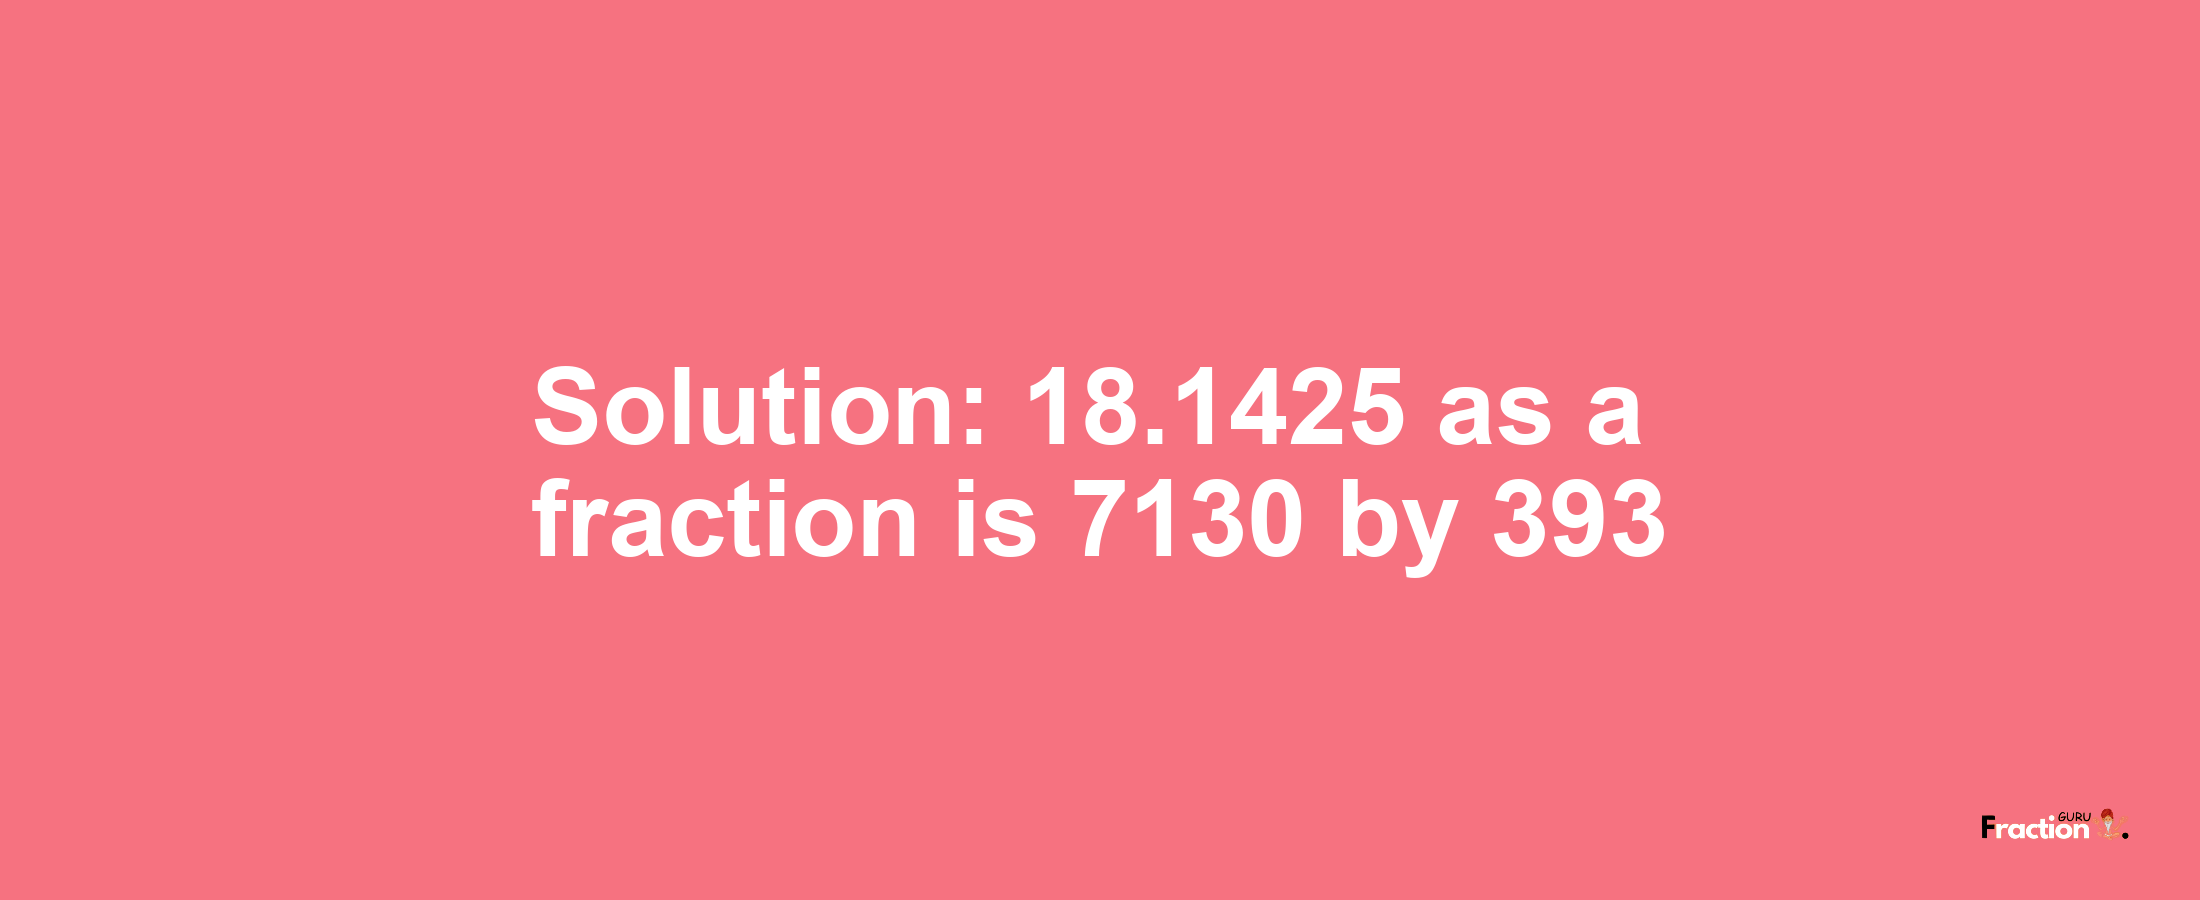 Solution:18.1425 as a fraction is 7130/393